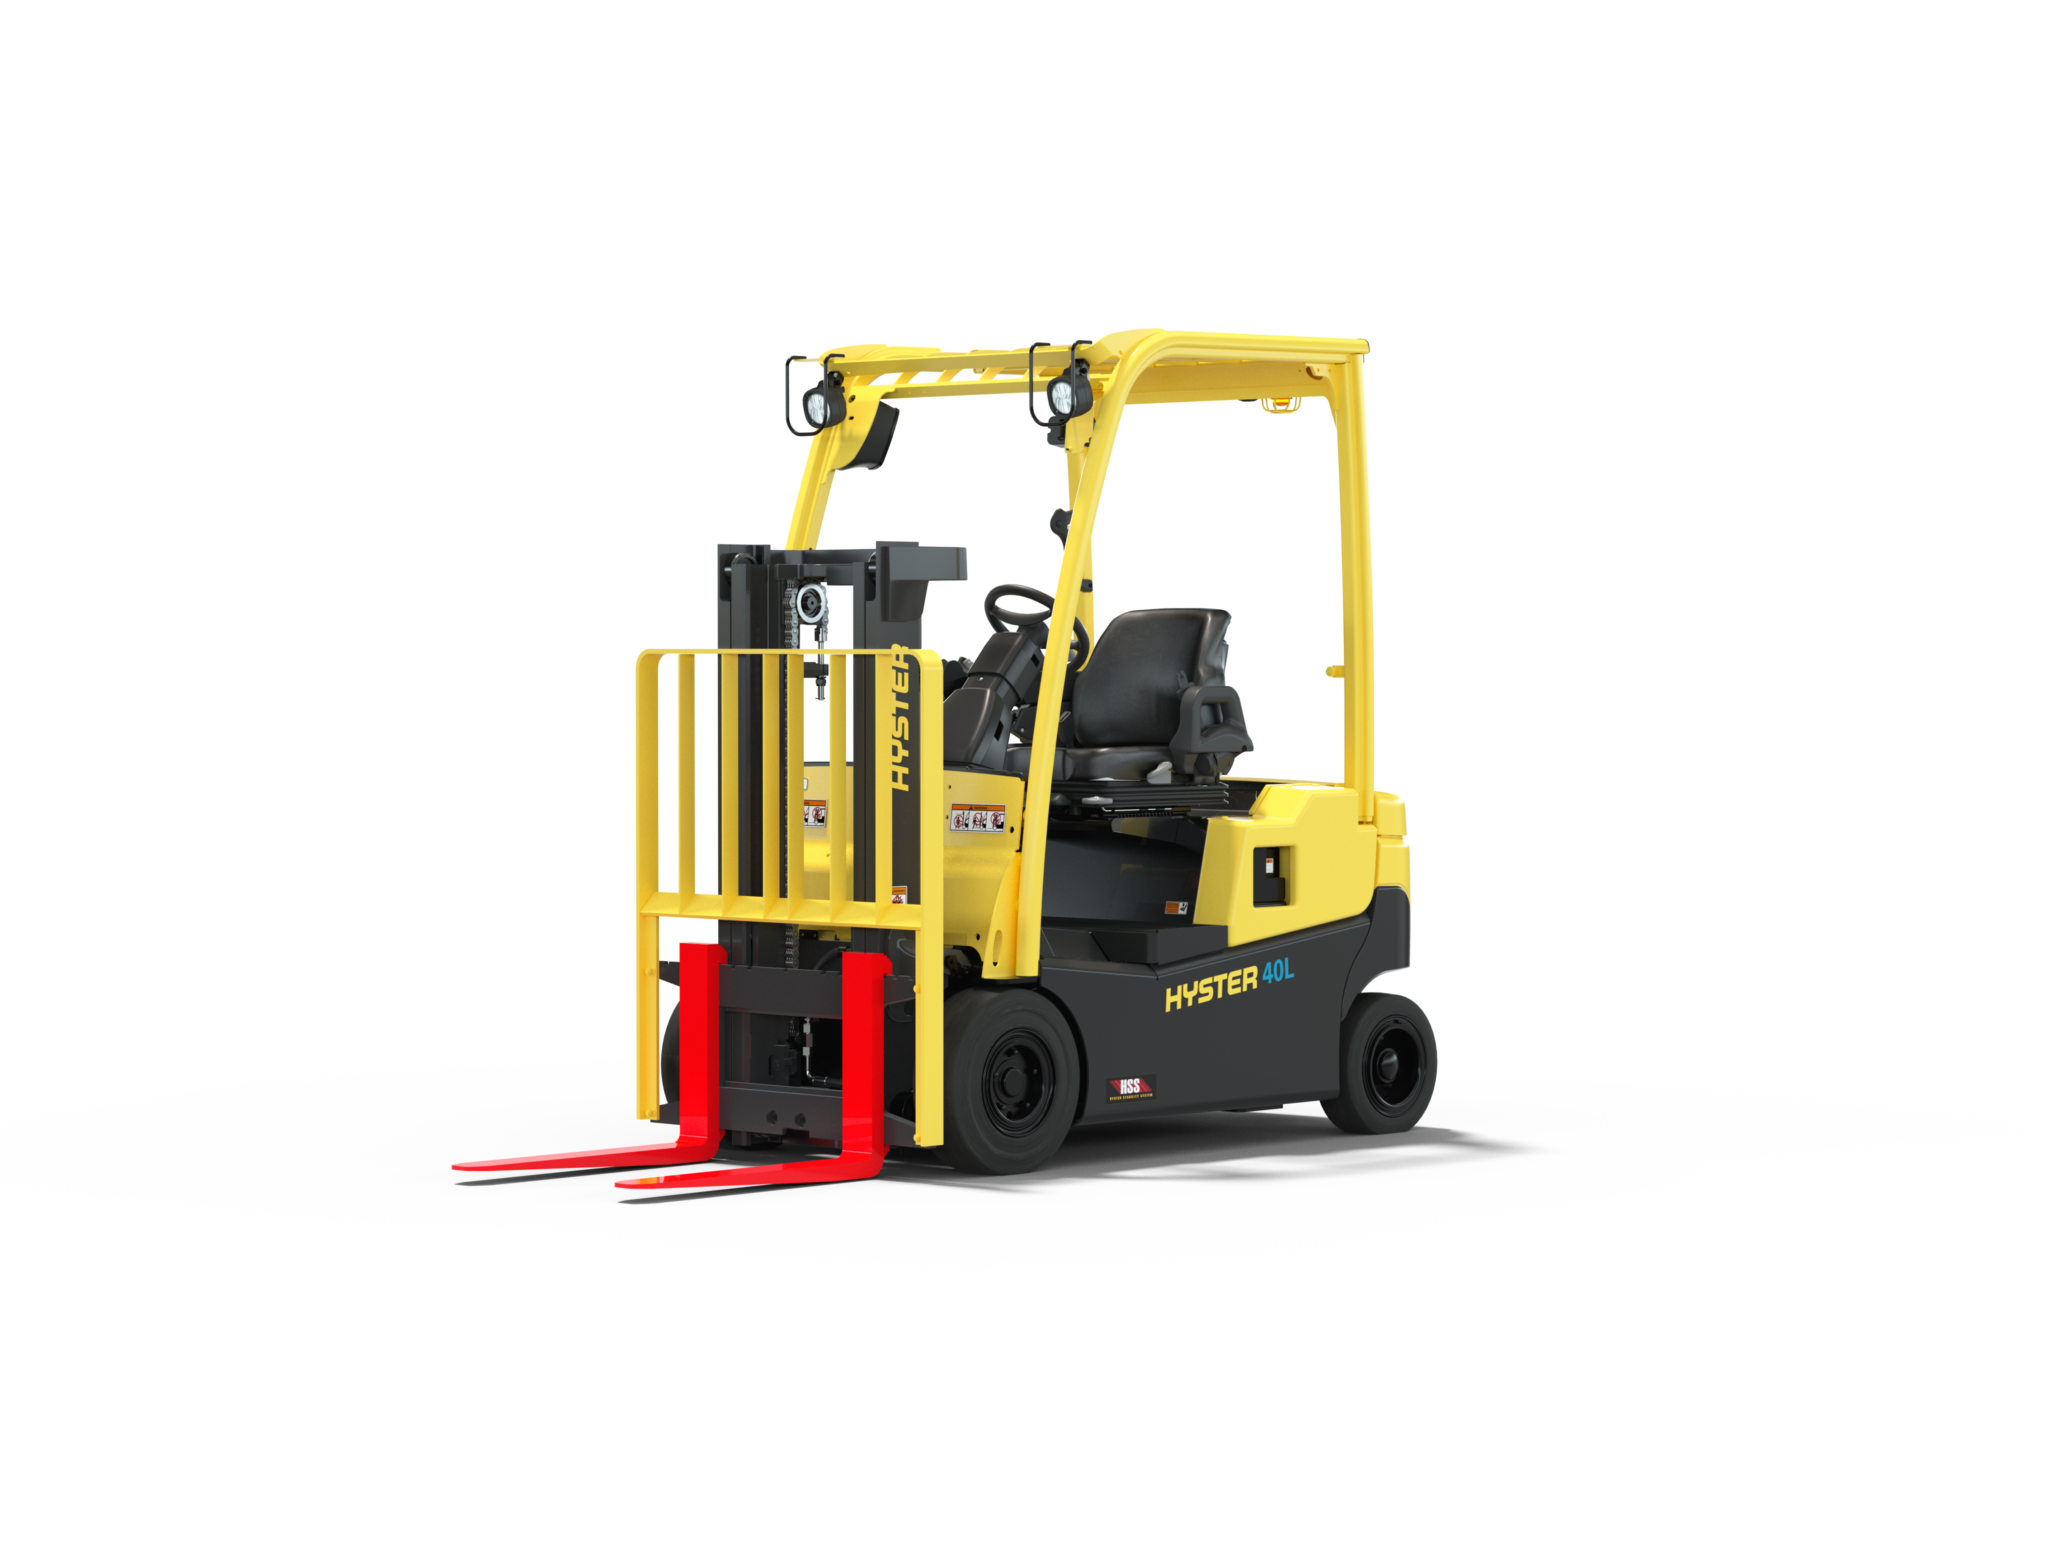 hyster-introduces-lift-truck-with-advanced-ergonomics-to-support-high